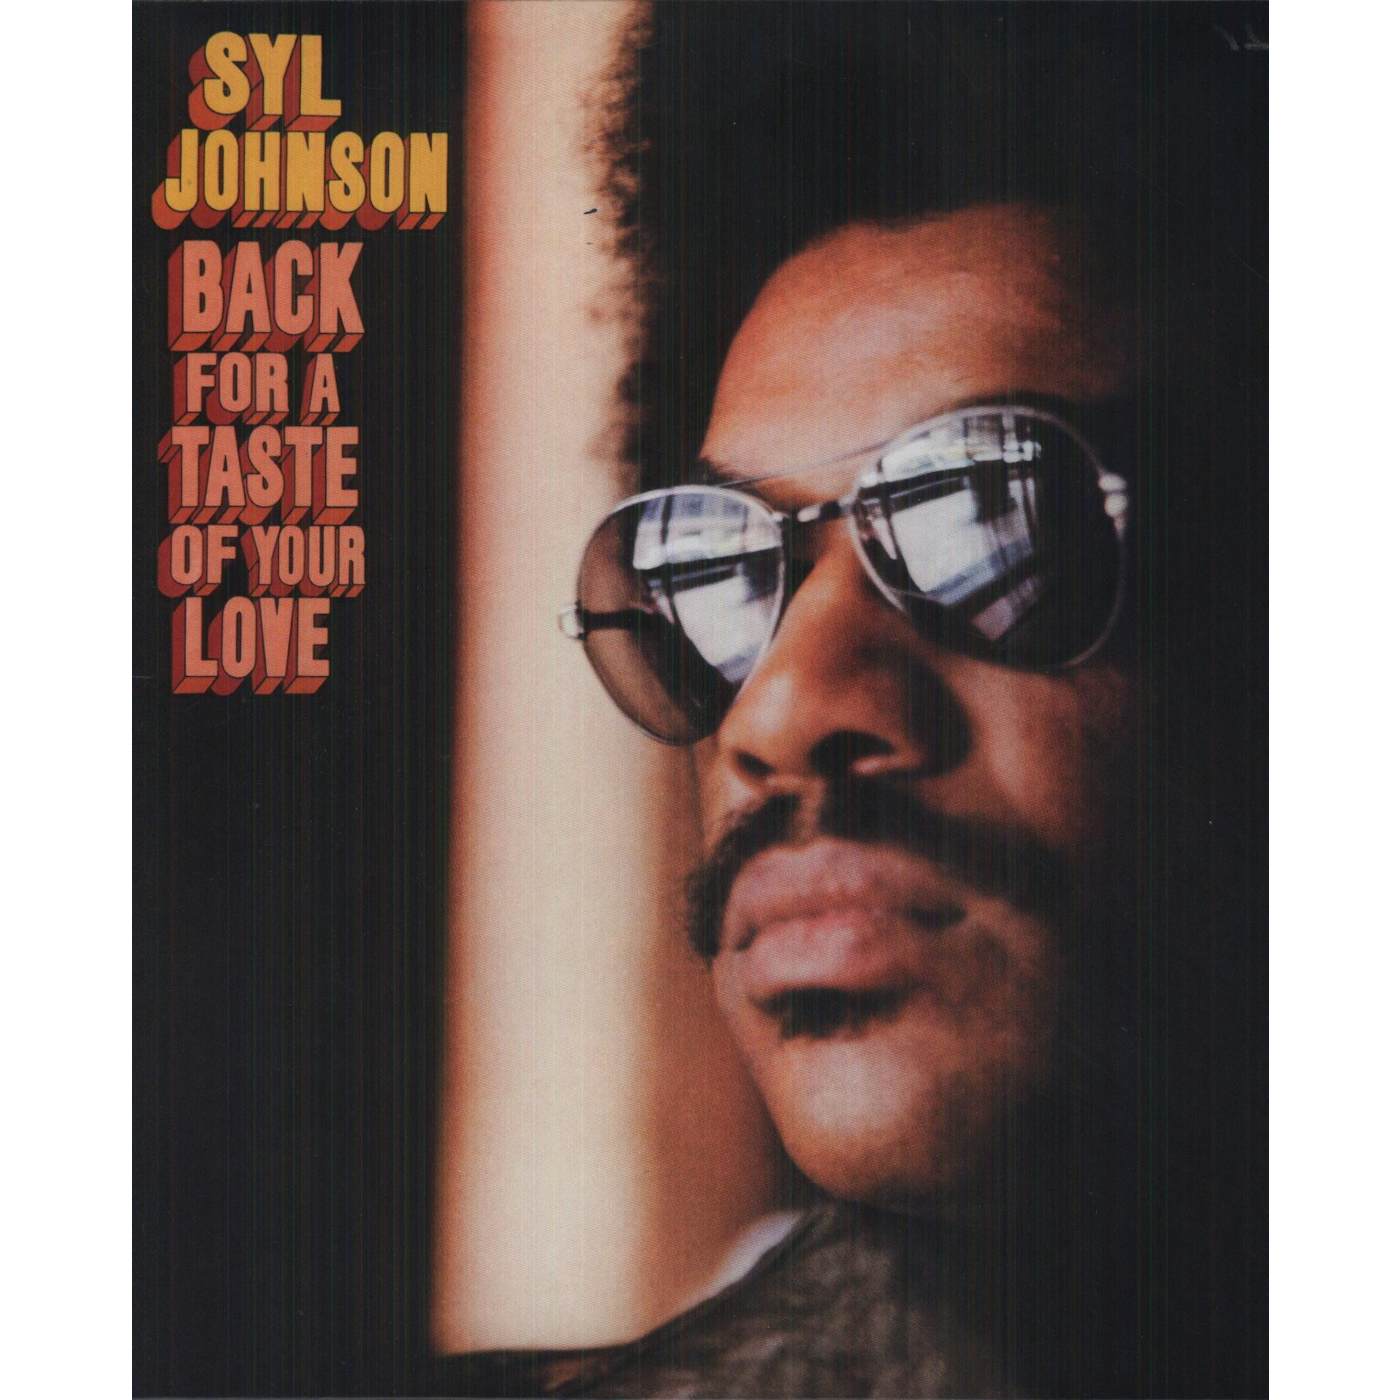 Syl Johnson Back for a Taste of Your Love Vinyl Record